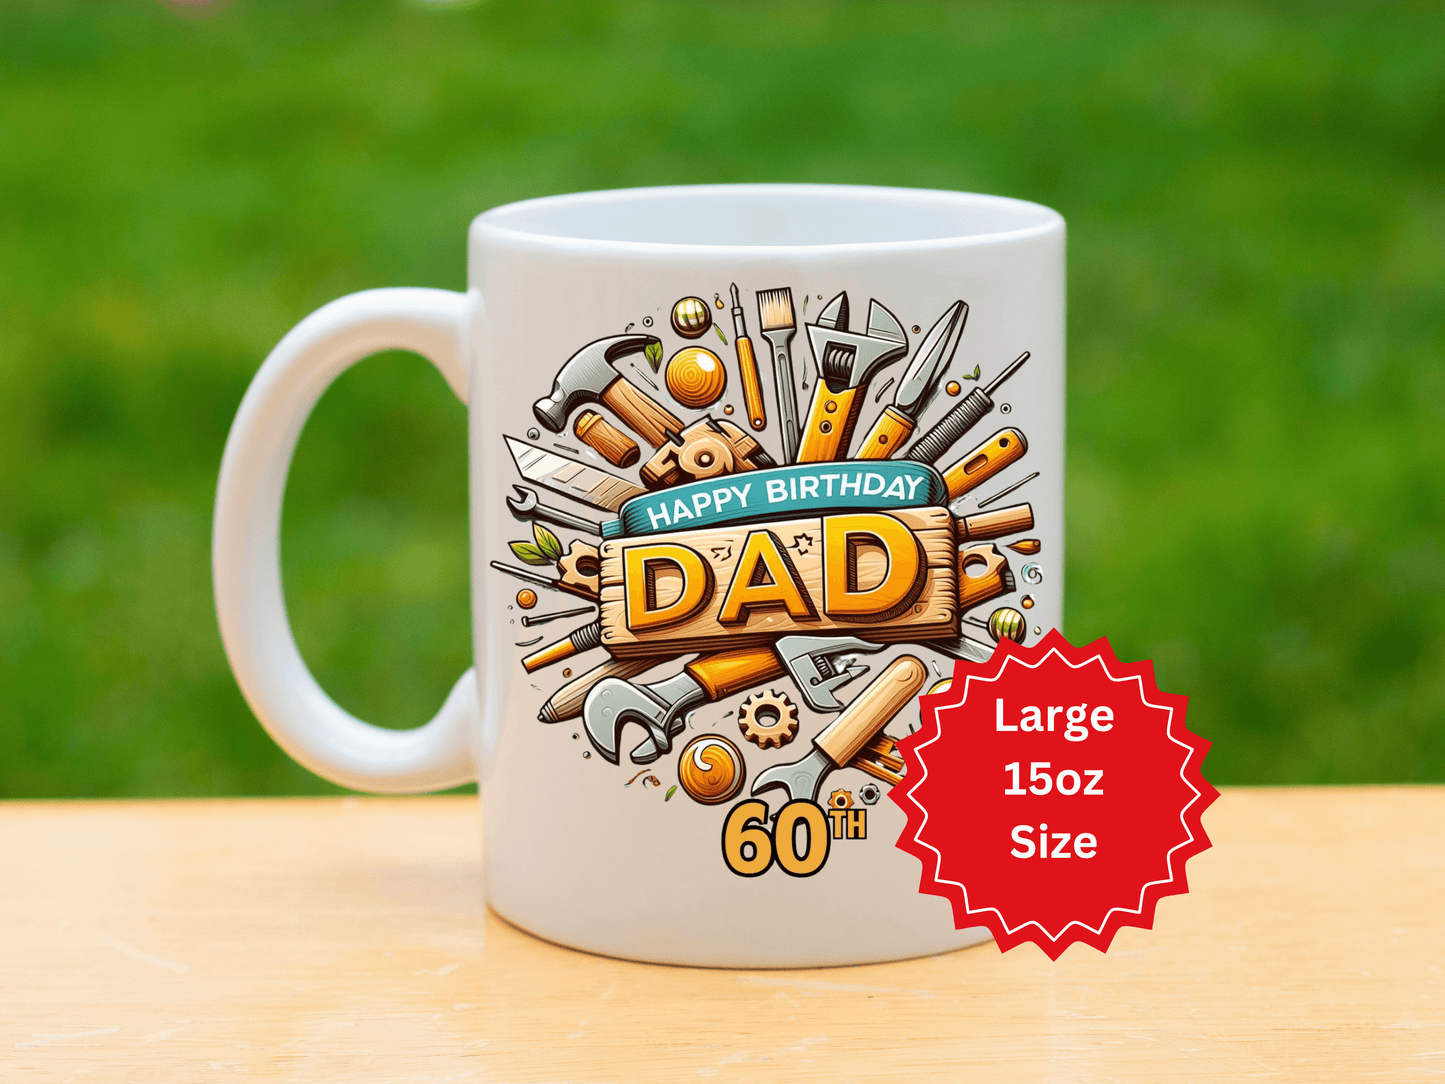 Happy Birthday Dad Mug, Construction Worker Coffee Cup, Father Teacup, Carpenter Coffee Mug Gift, Personalized Age